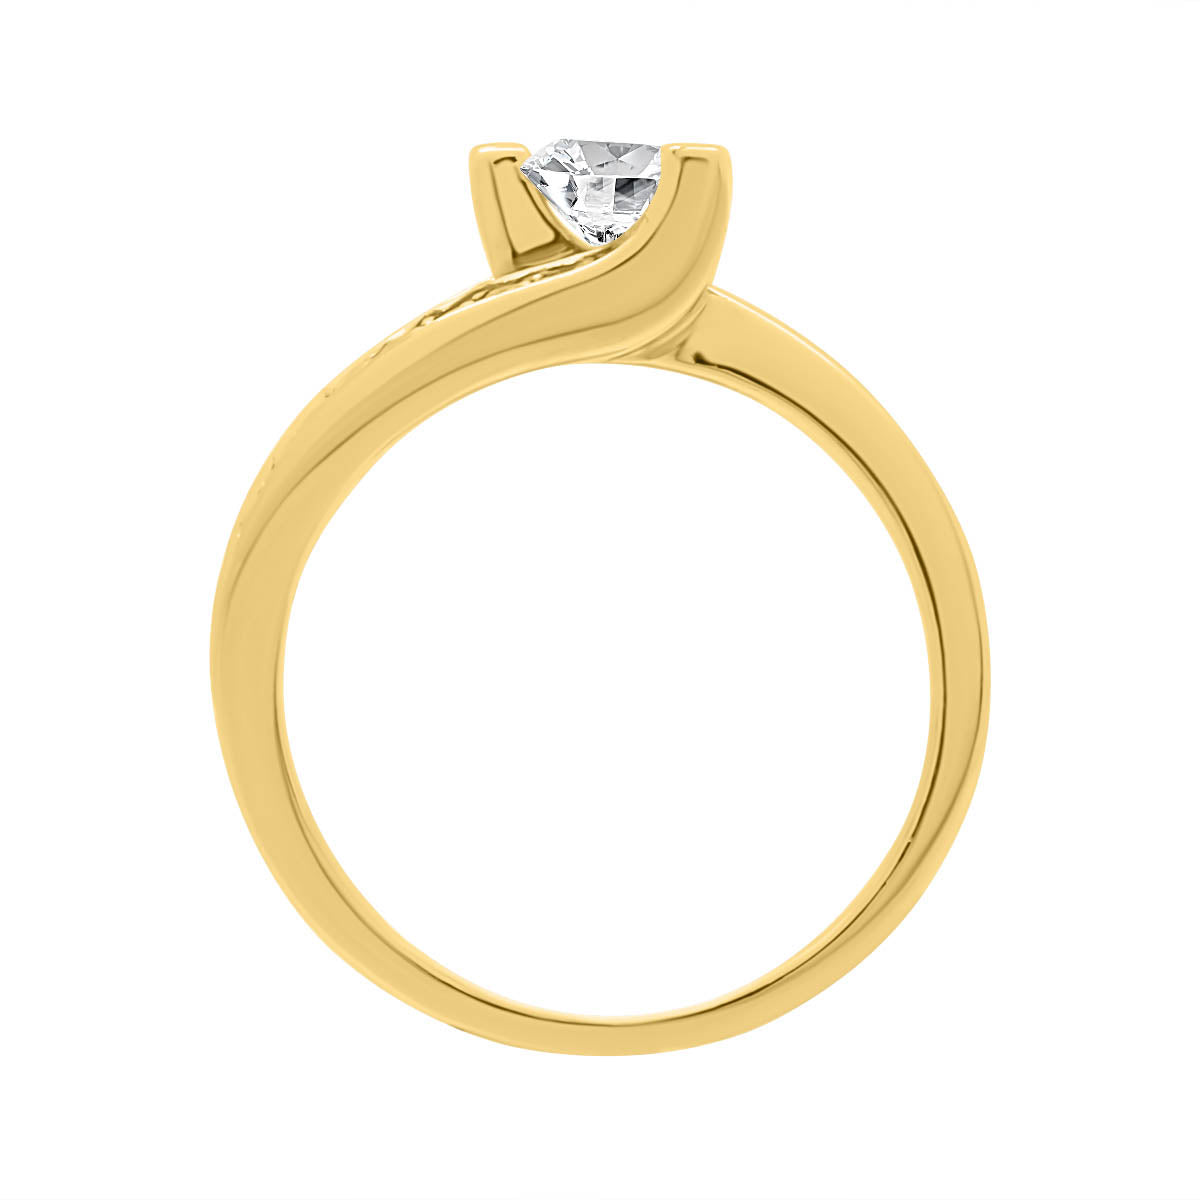 Unusual Diamond Engagement Ring Set in yellow Gold standing vertical